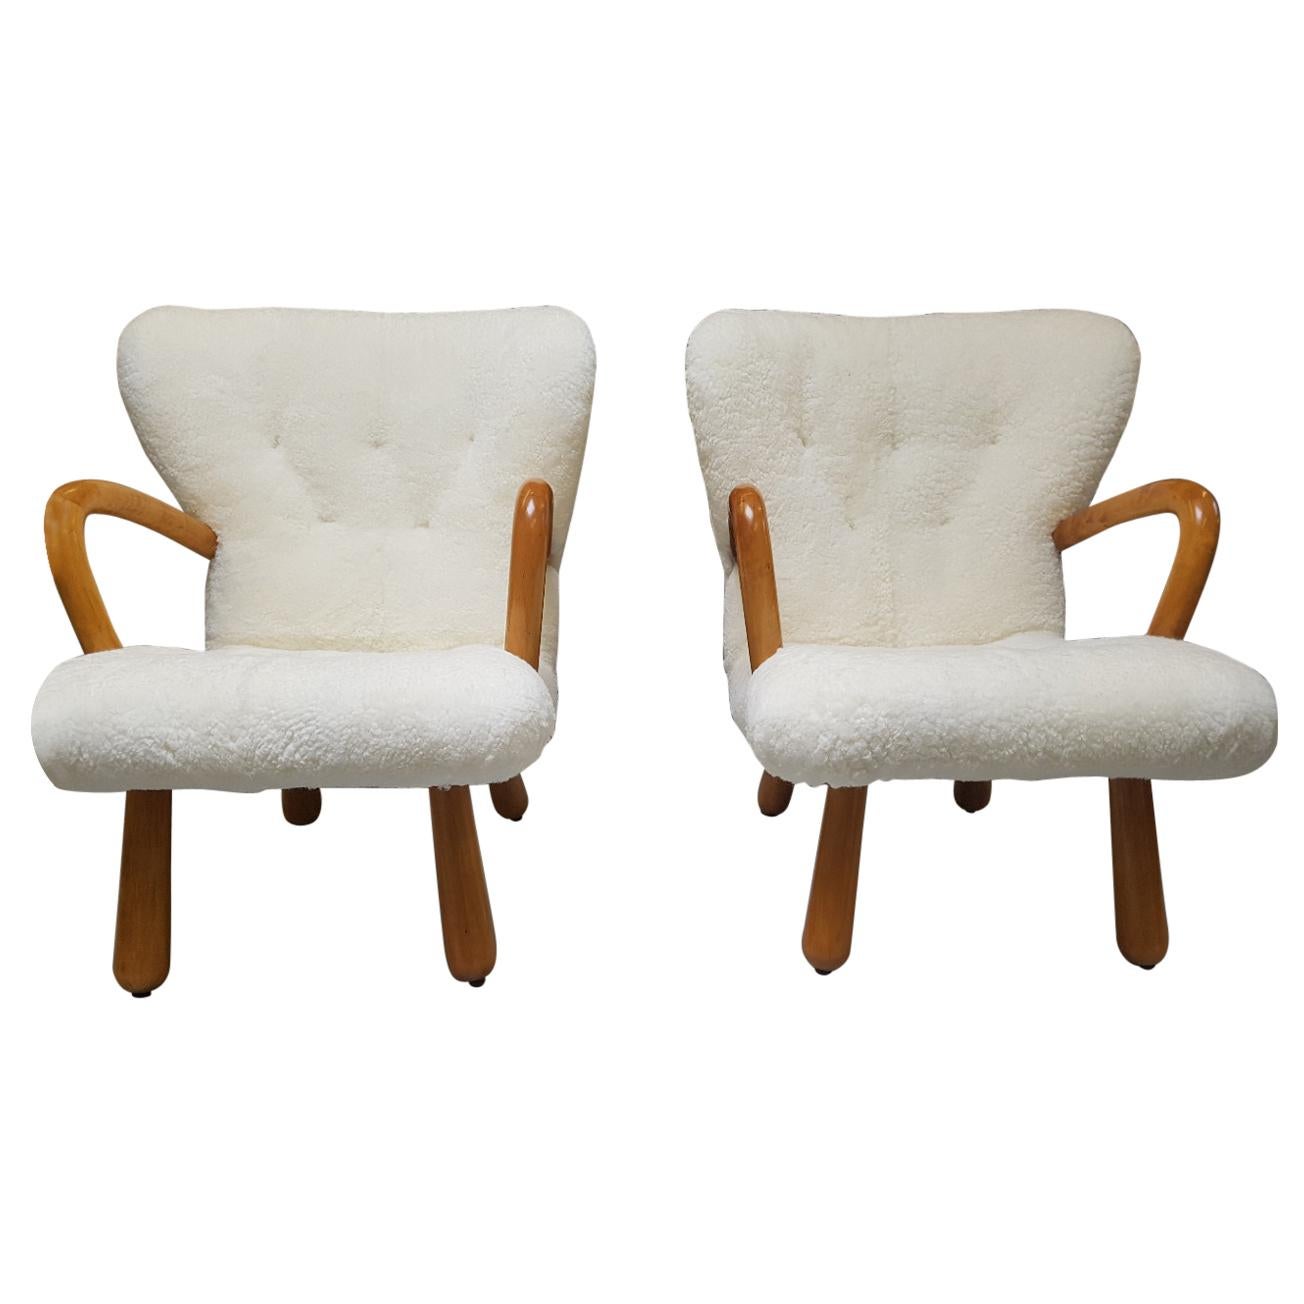 Pair of AKE “Clam” Chairs, 1954, IKEA, Curly Lambskin Upholstery